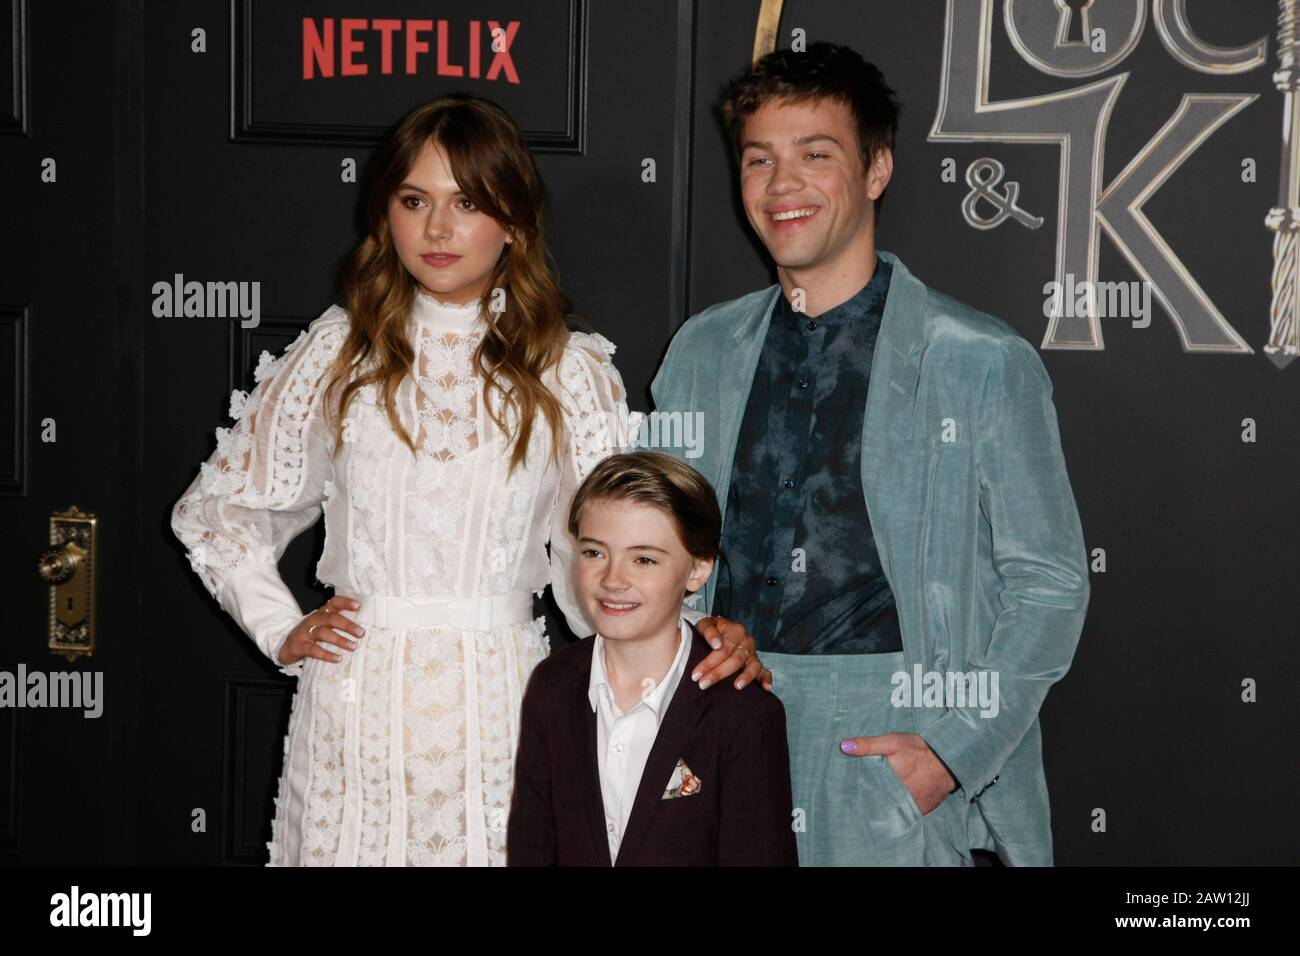 Hollywood, California, USA. 05th Feb, 2020. Thomas Mitchell Barnet attends  Netflix's Locke & Key Series Premiere photo call at the Egyptian Theatre  on February 05, 2020 in Hollywood, California. Photo:  CraSH/imageSPACE/MediaPunch Credit